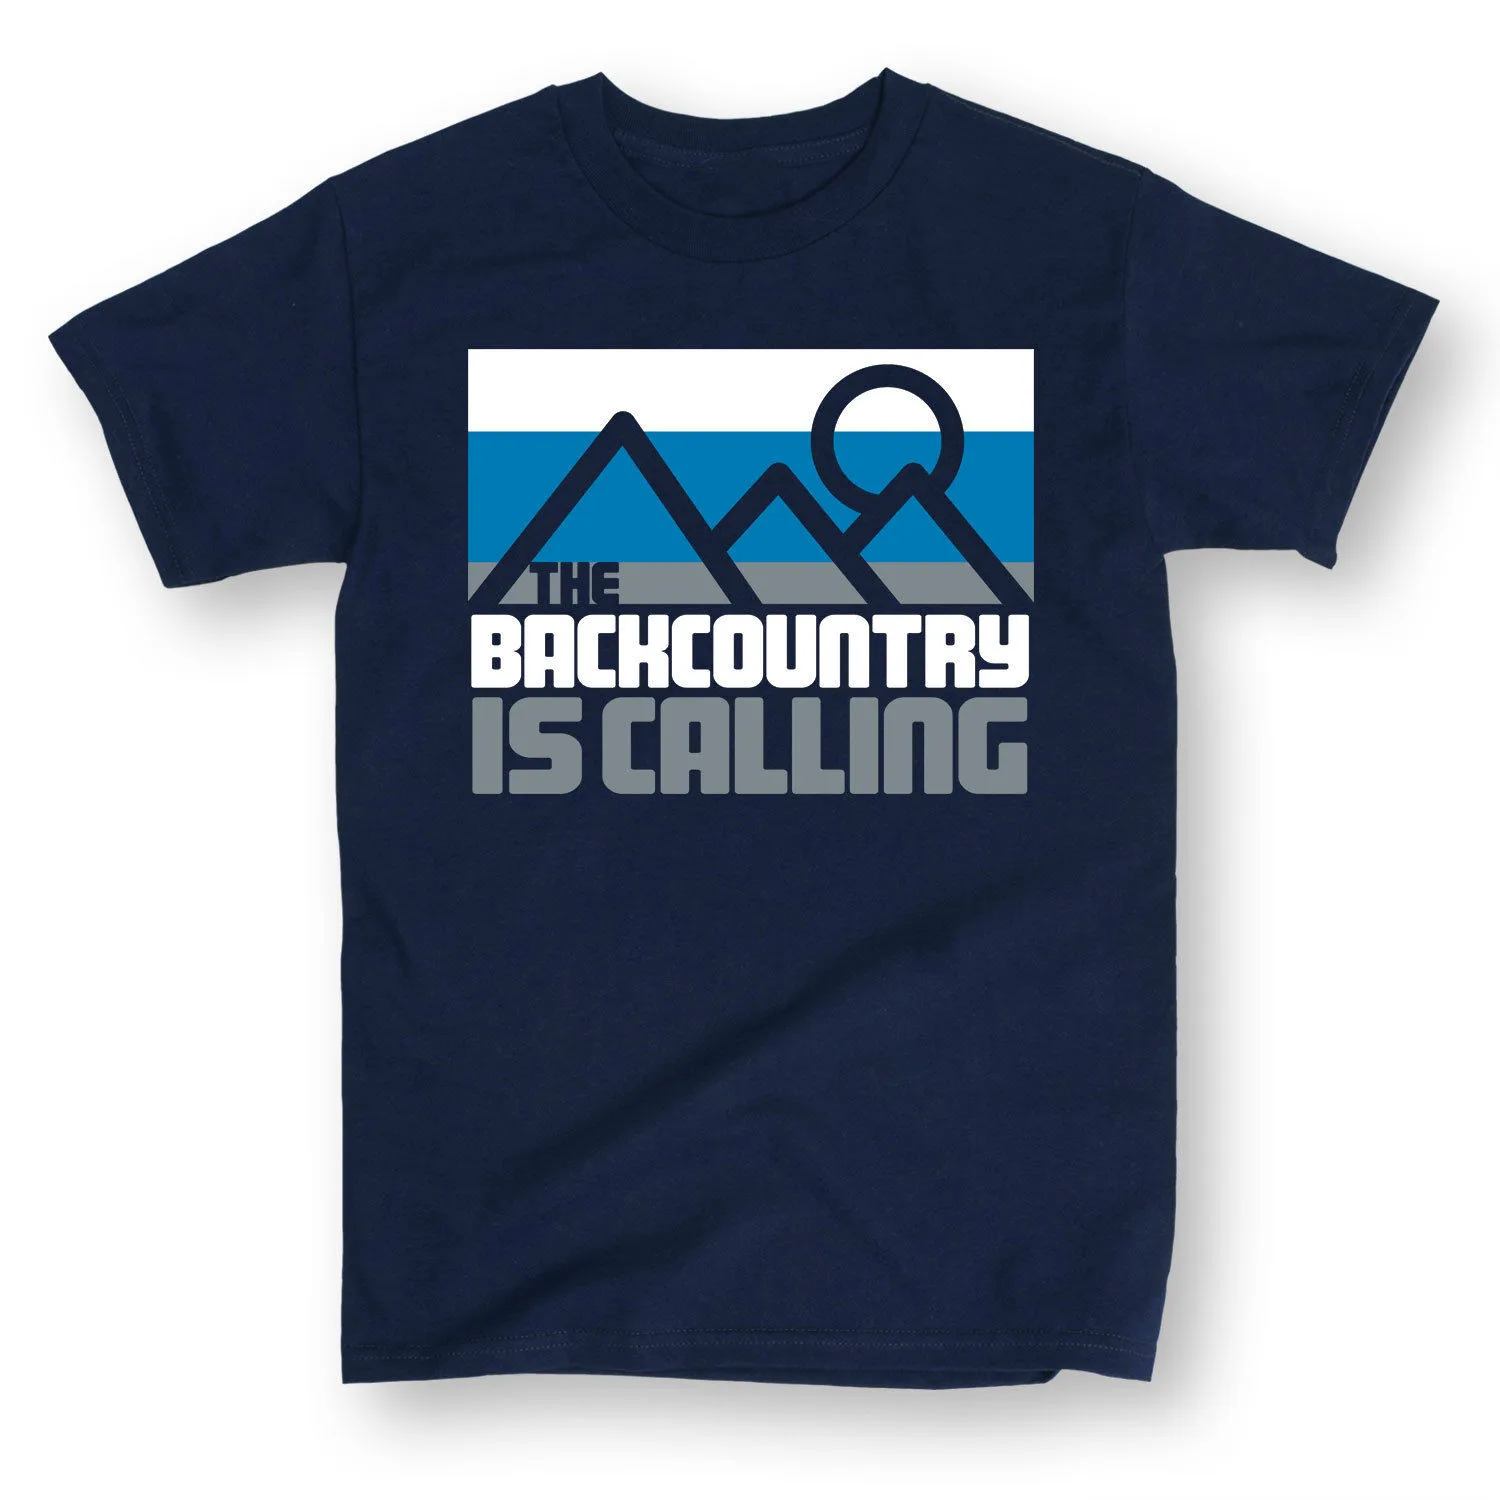 

The Backcountry Is Calling. Hot Sale Fashion T-Shirt. Summer Cotton O-Neck Short Sleeve Mens T Shirt New S-3XL